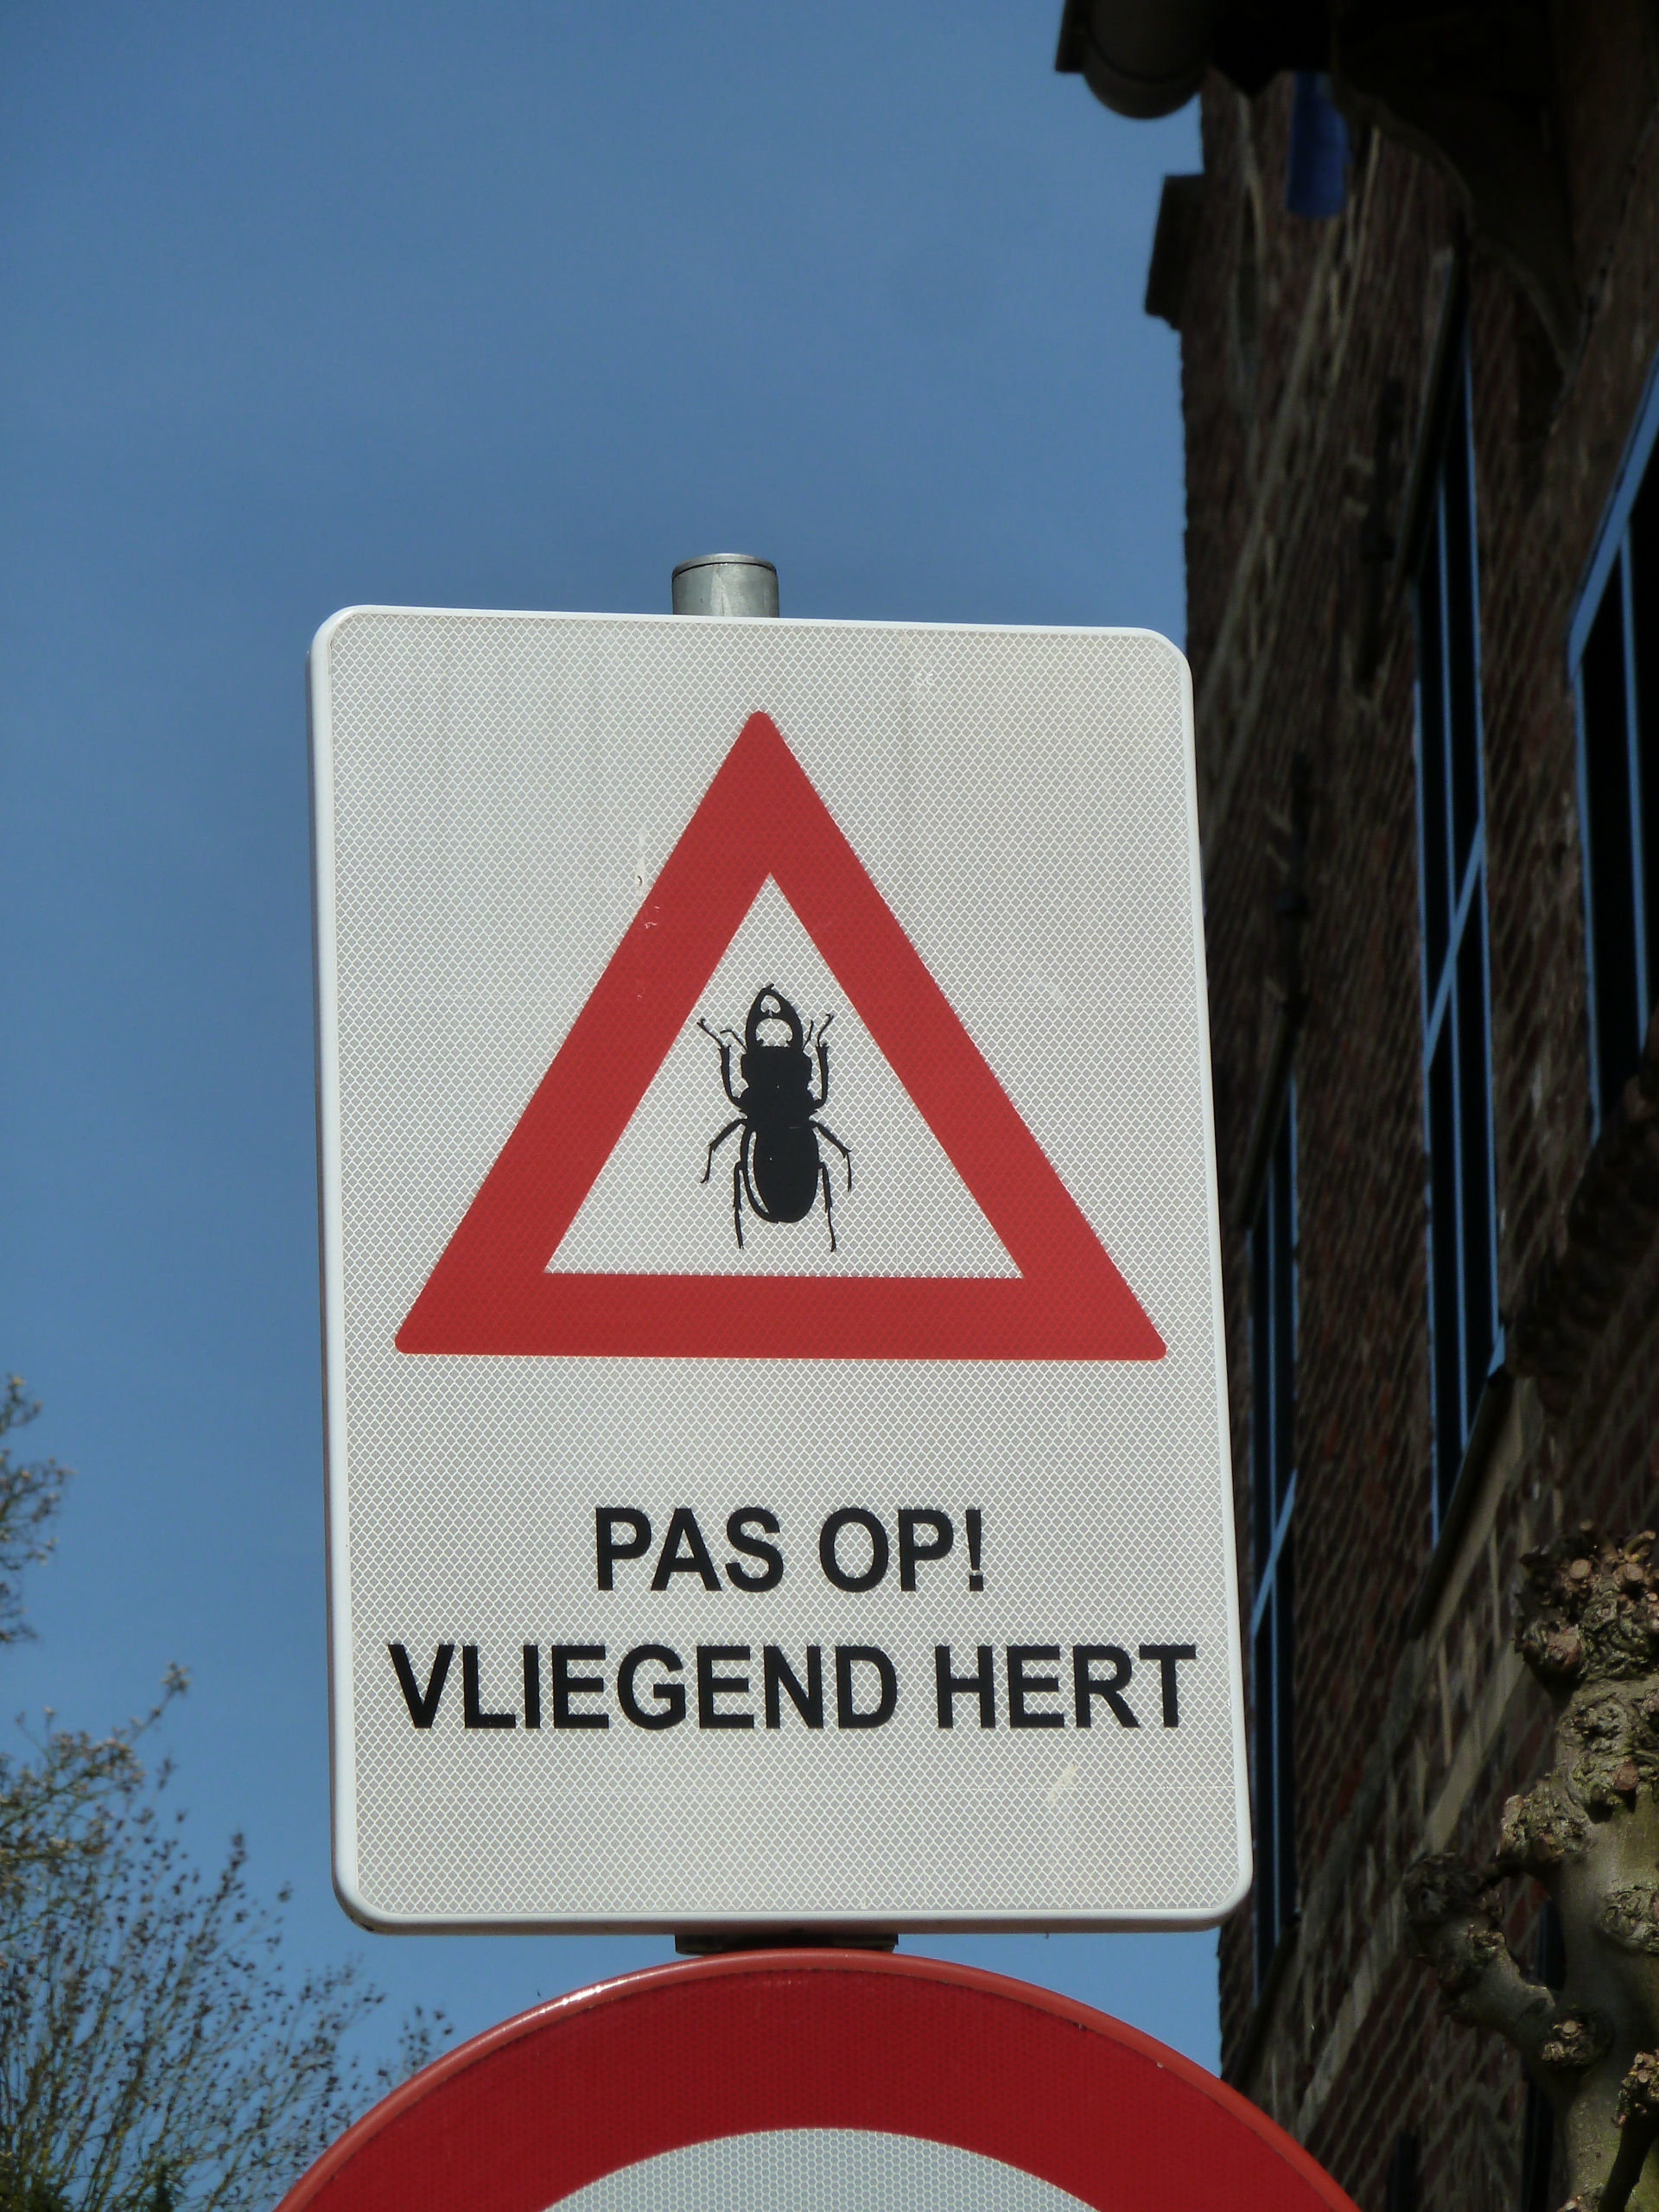 Stag beetle traffic sign